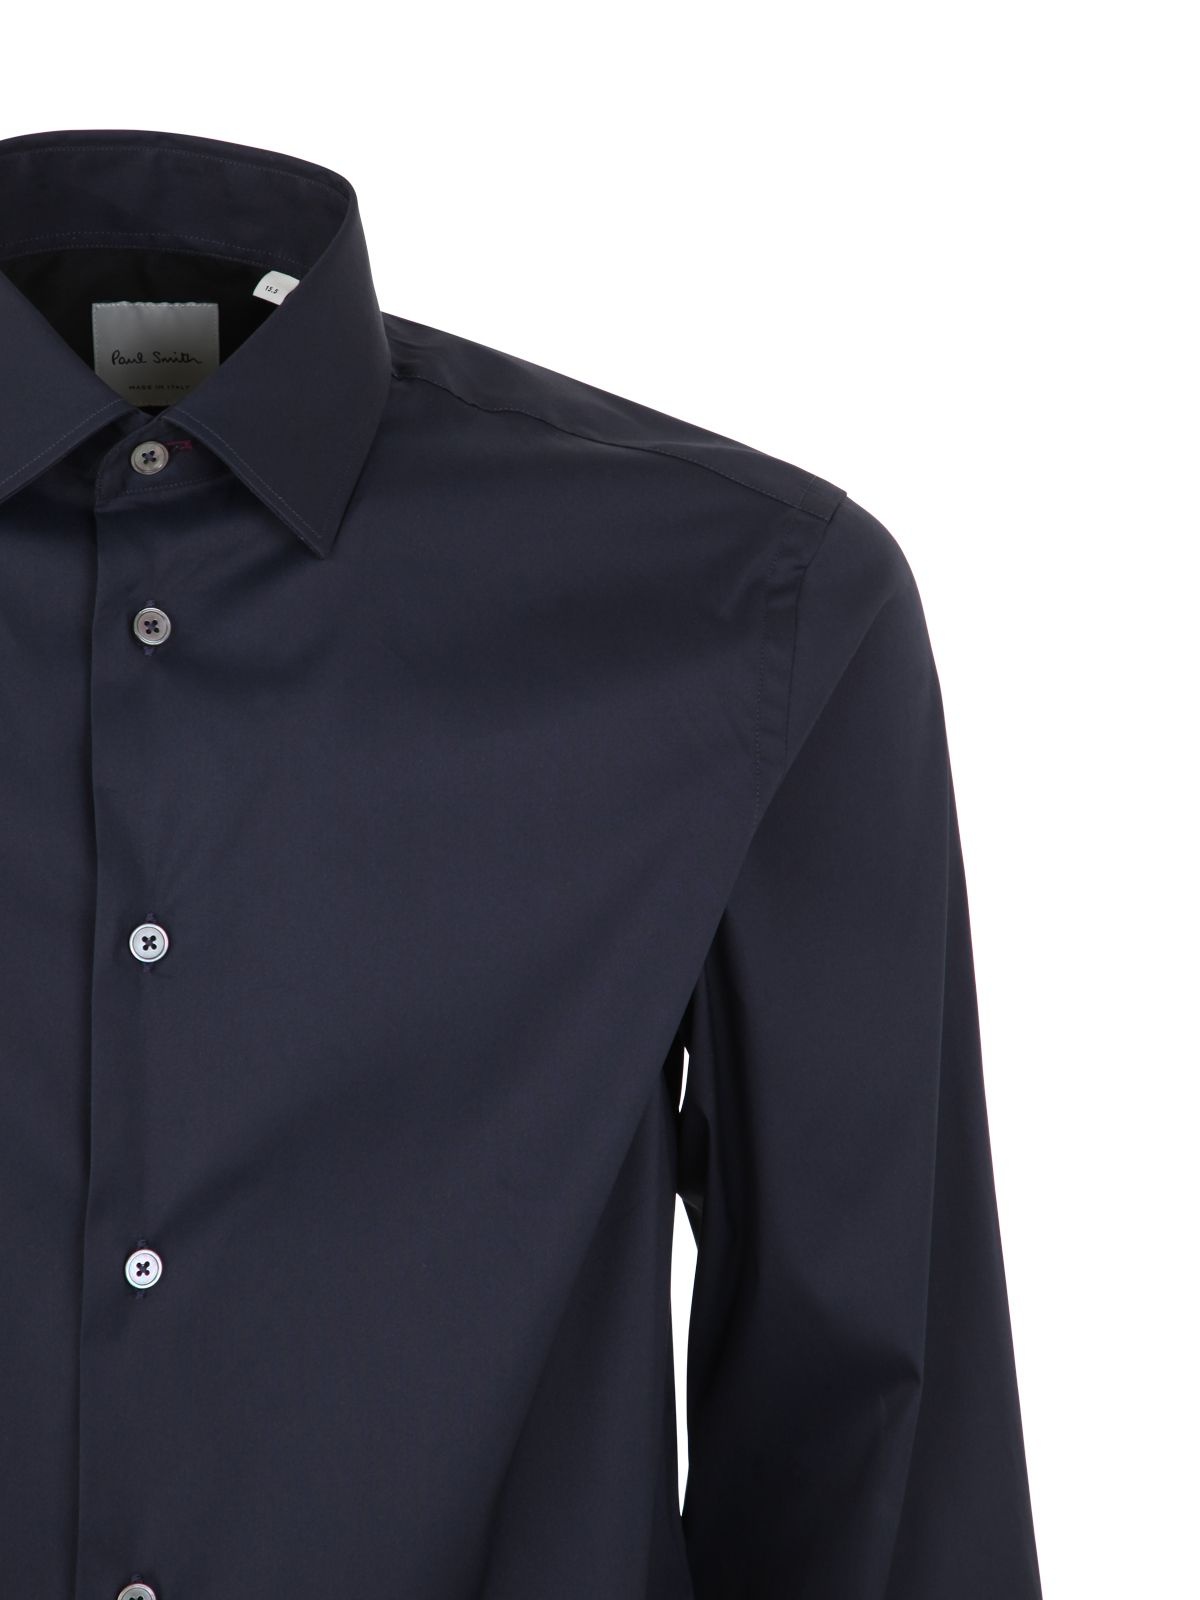 Tailored Fit Men's Shirt - 3